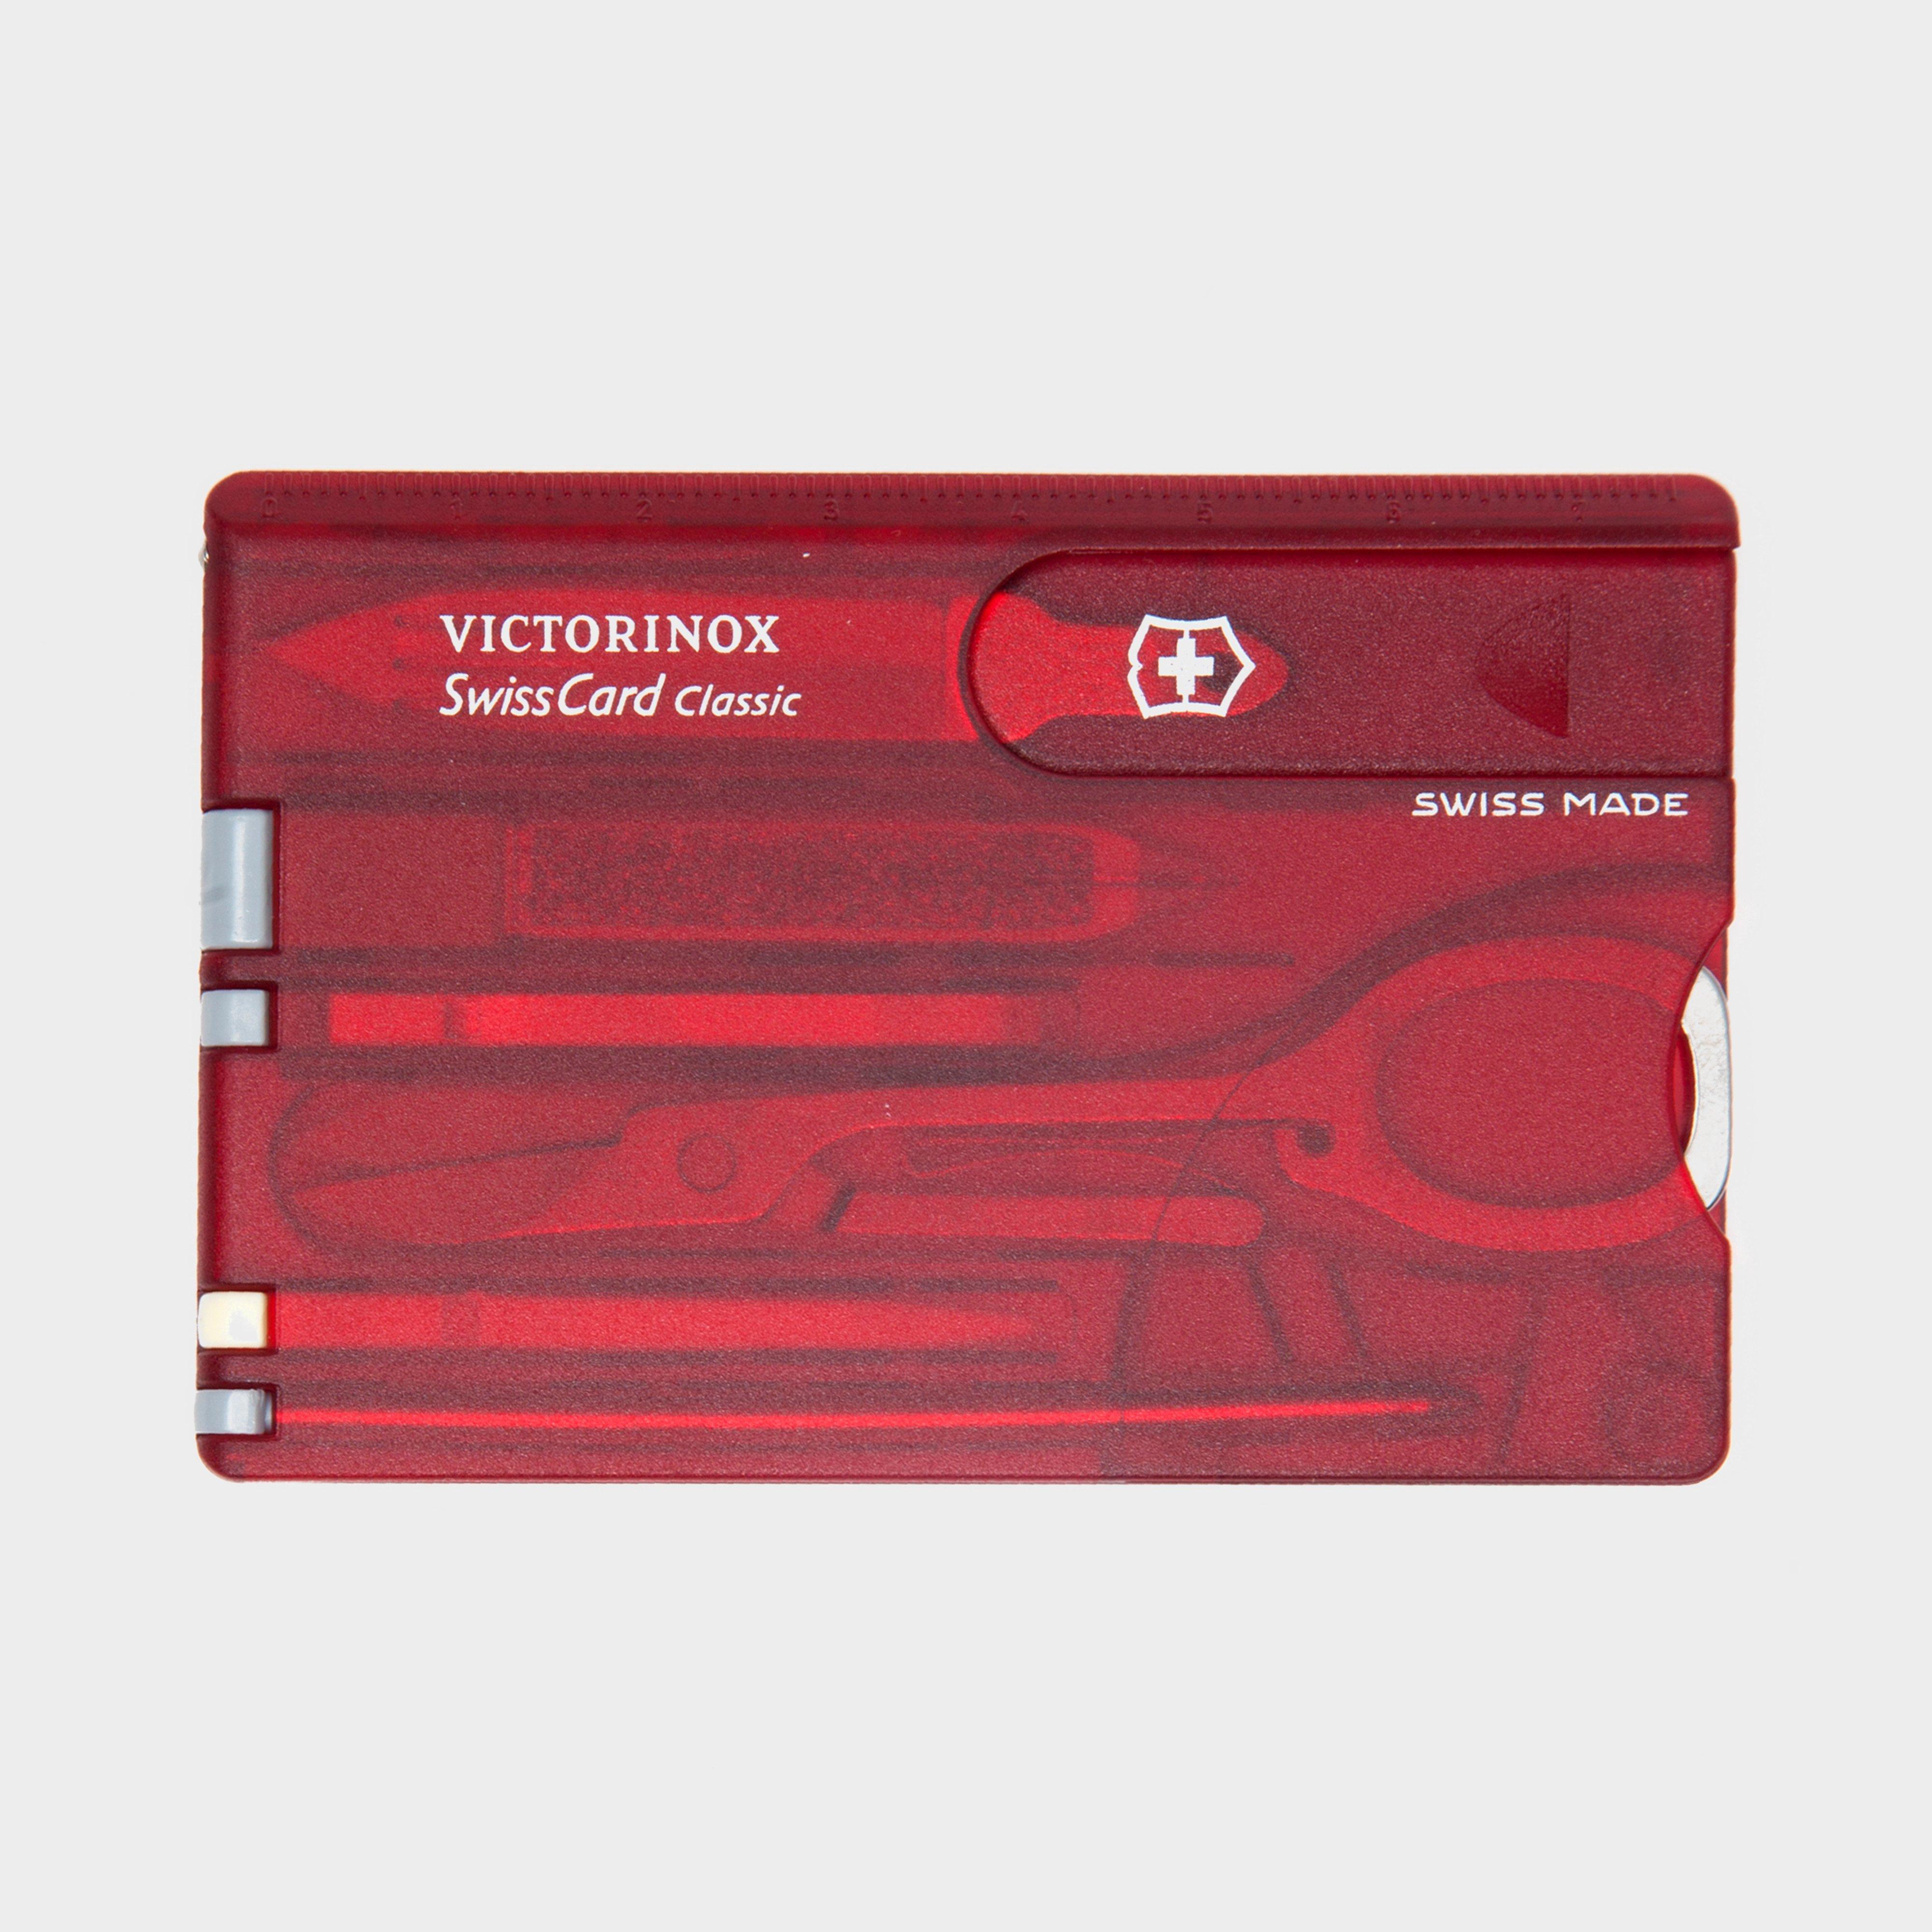 Victorinox Swisscard Classic - Red/red  Red/red